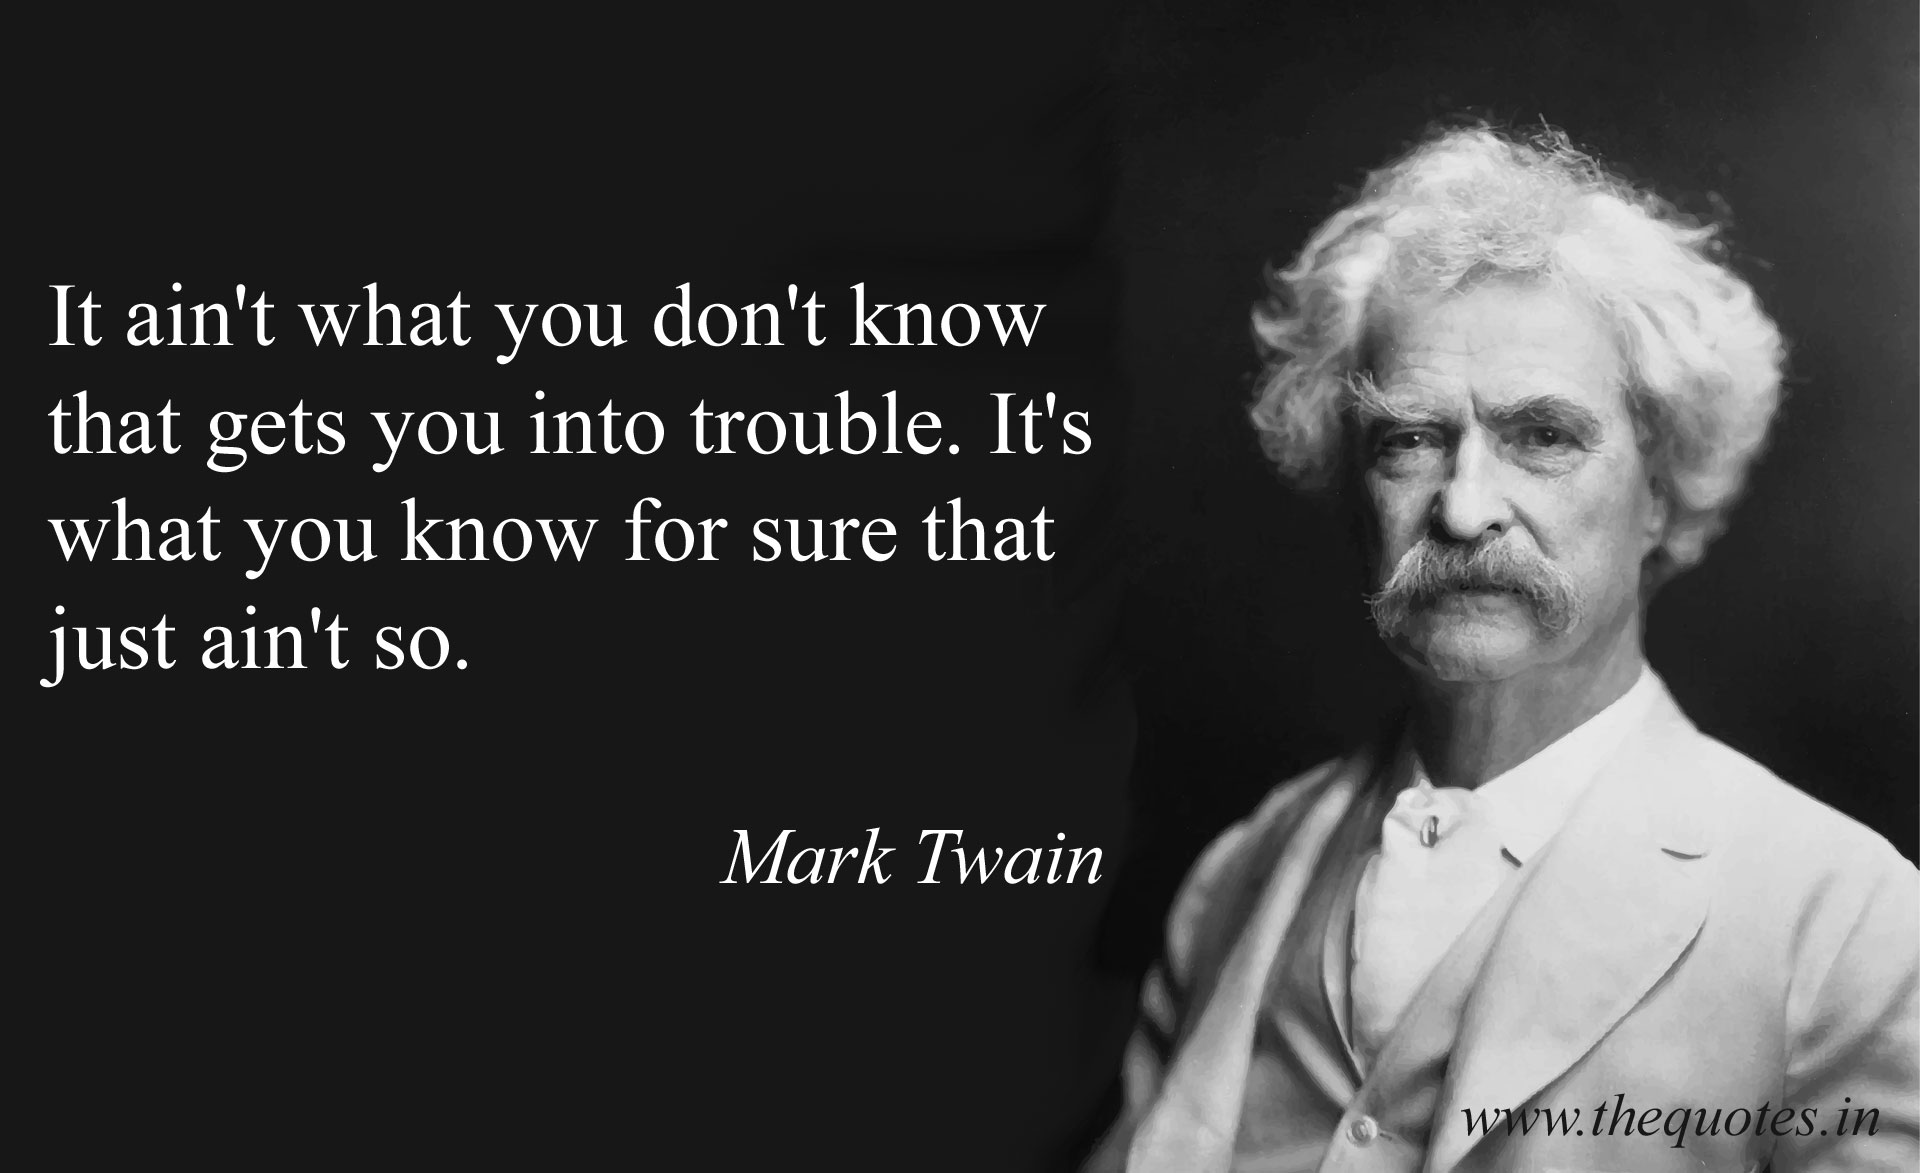 Aint-what-you-dont-know-Image-Mark-Twain.jpg